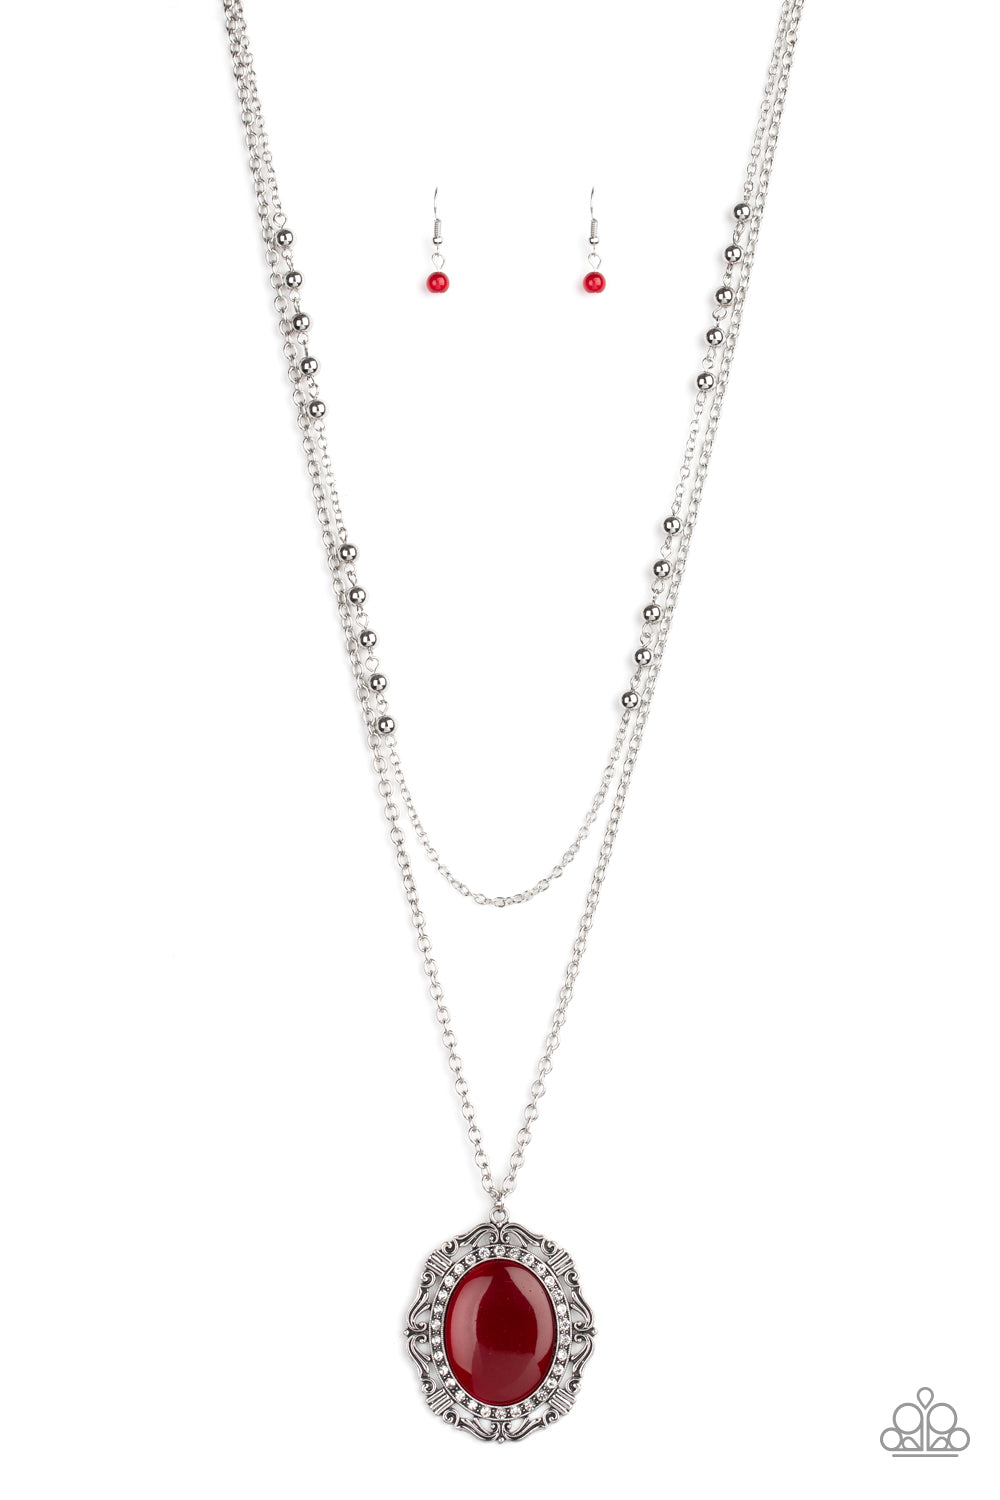 Endlessly Enchanted - Red moonstone necklace